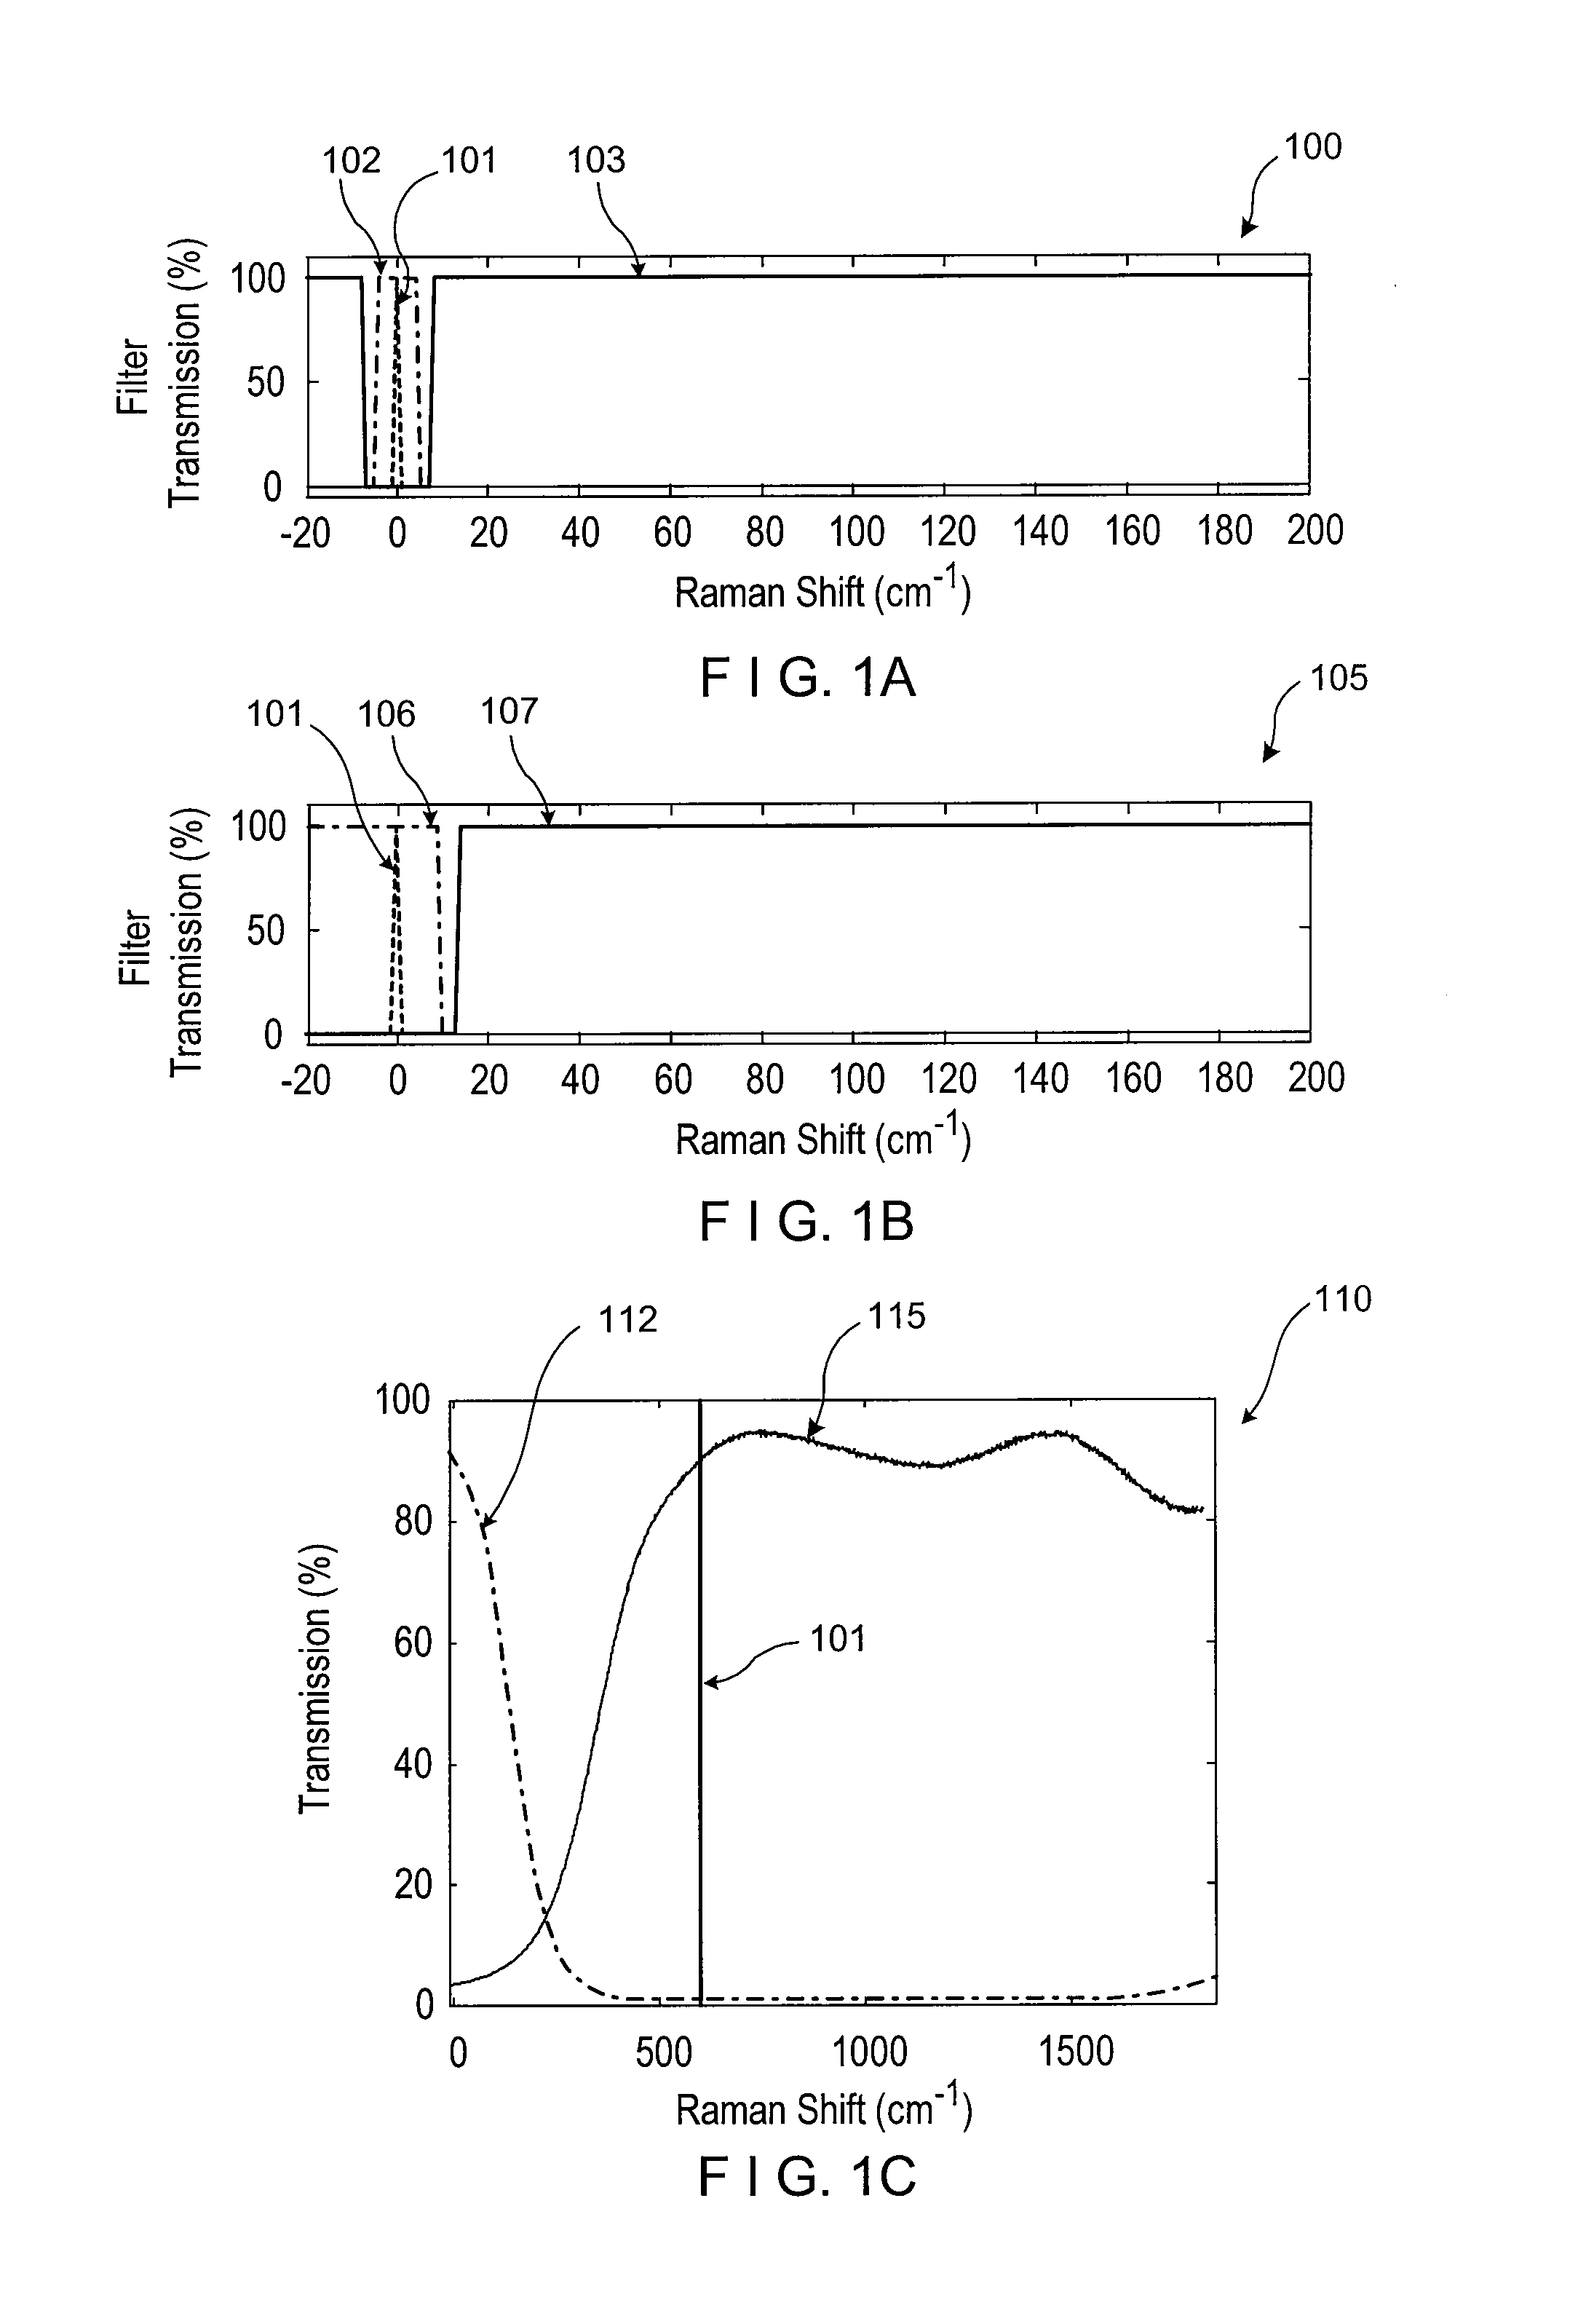 Systems and methods for receiving and/or analyzing information associated with electro-magnetic radiation